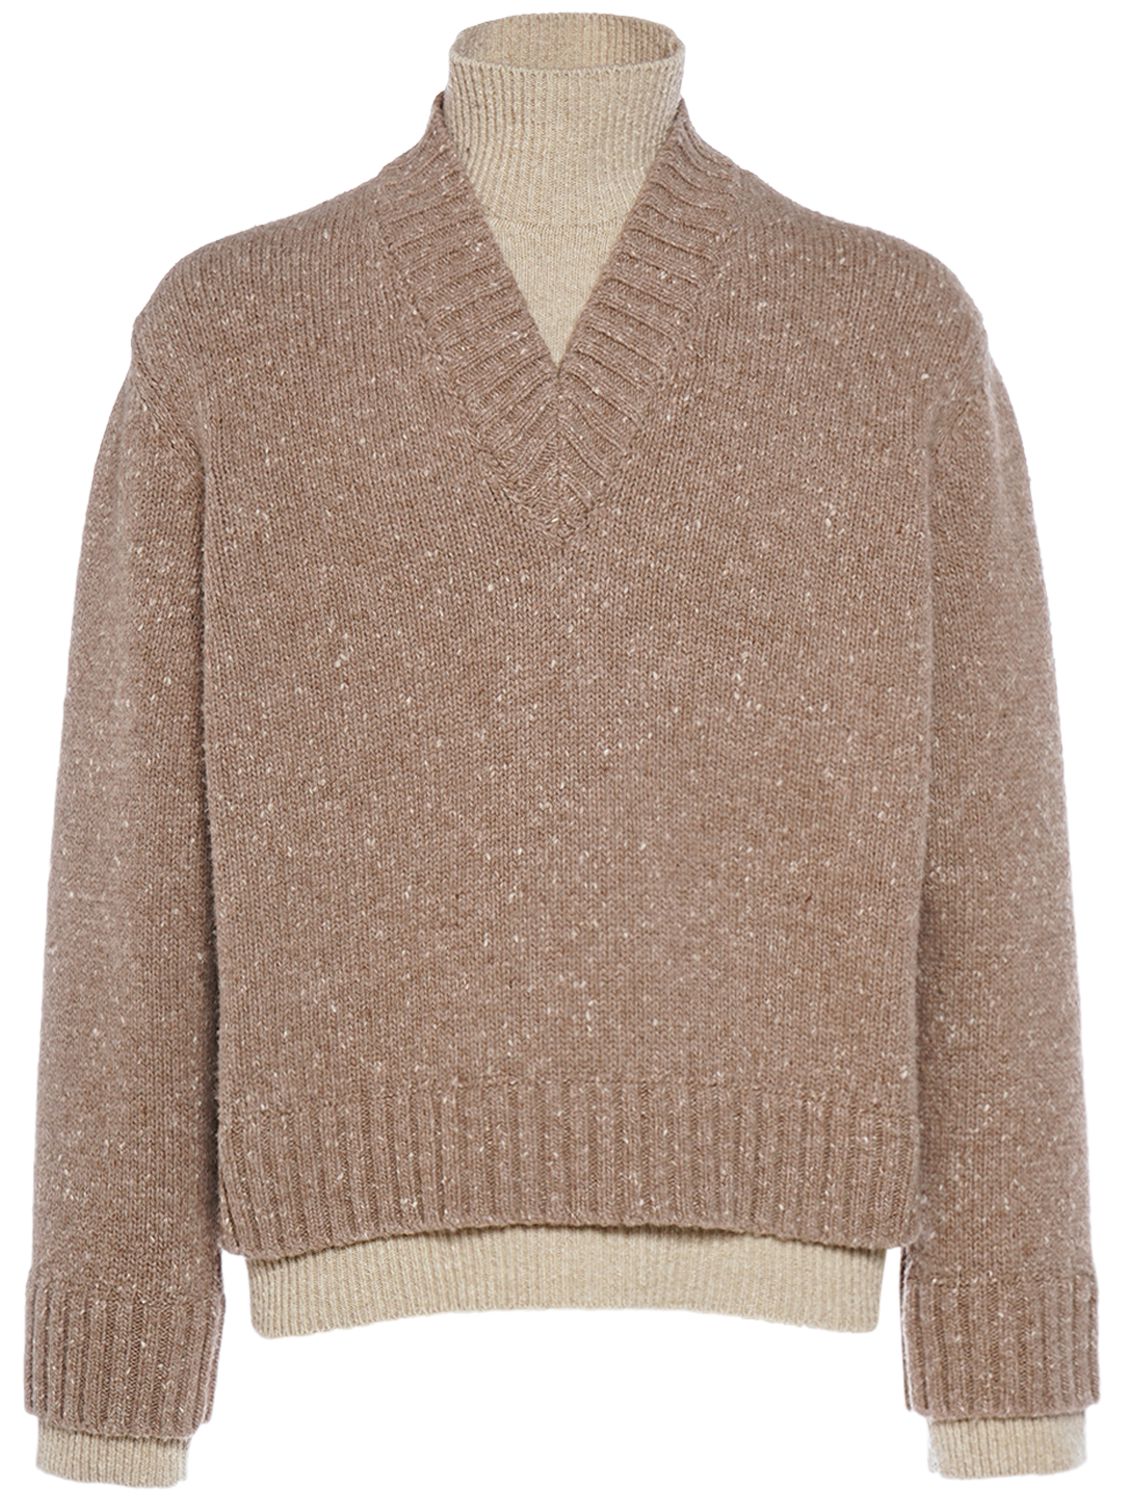 Double Layer Wool Knit Sweater